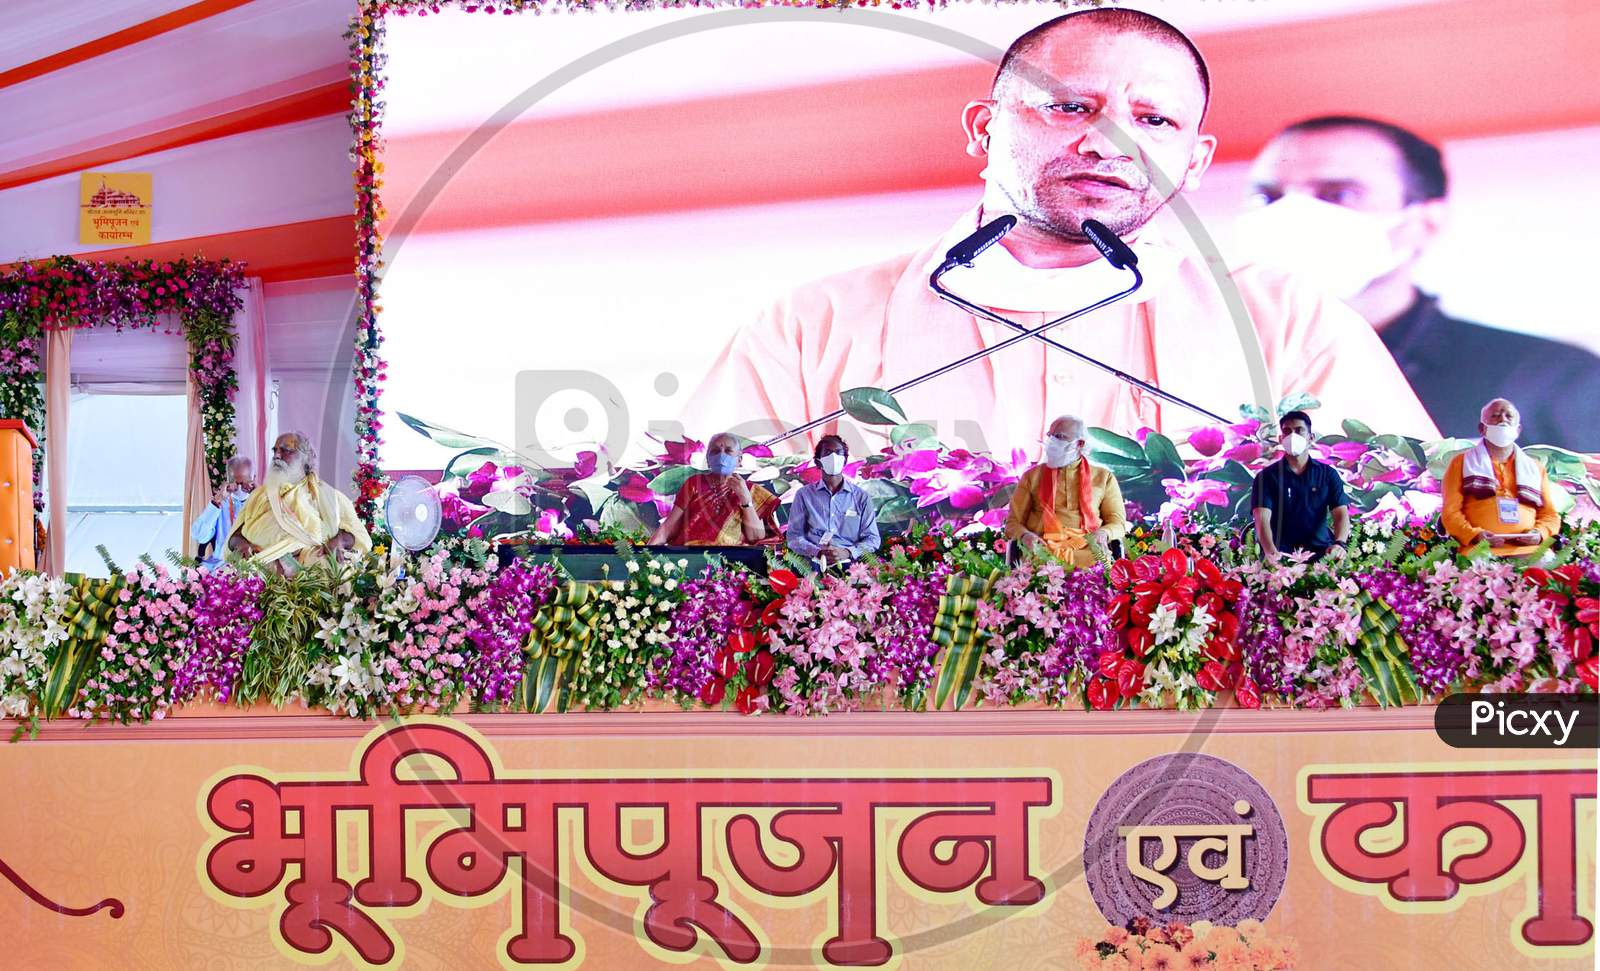 Uttar Pradesh Chief Minister Yogi Adityanath along with Prime Minister Narendra Modi, and Rashtriya Swayamsevak Sangh (RSS) chief Mohan Bhagwat, addresses people after the foundation laying ceremony for the Hindu Lord Ram's temple, in Ayodhya, India, August 5, 2020.